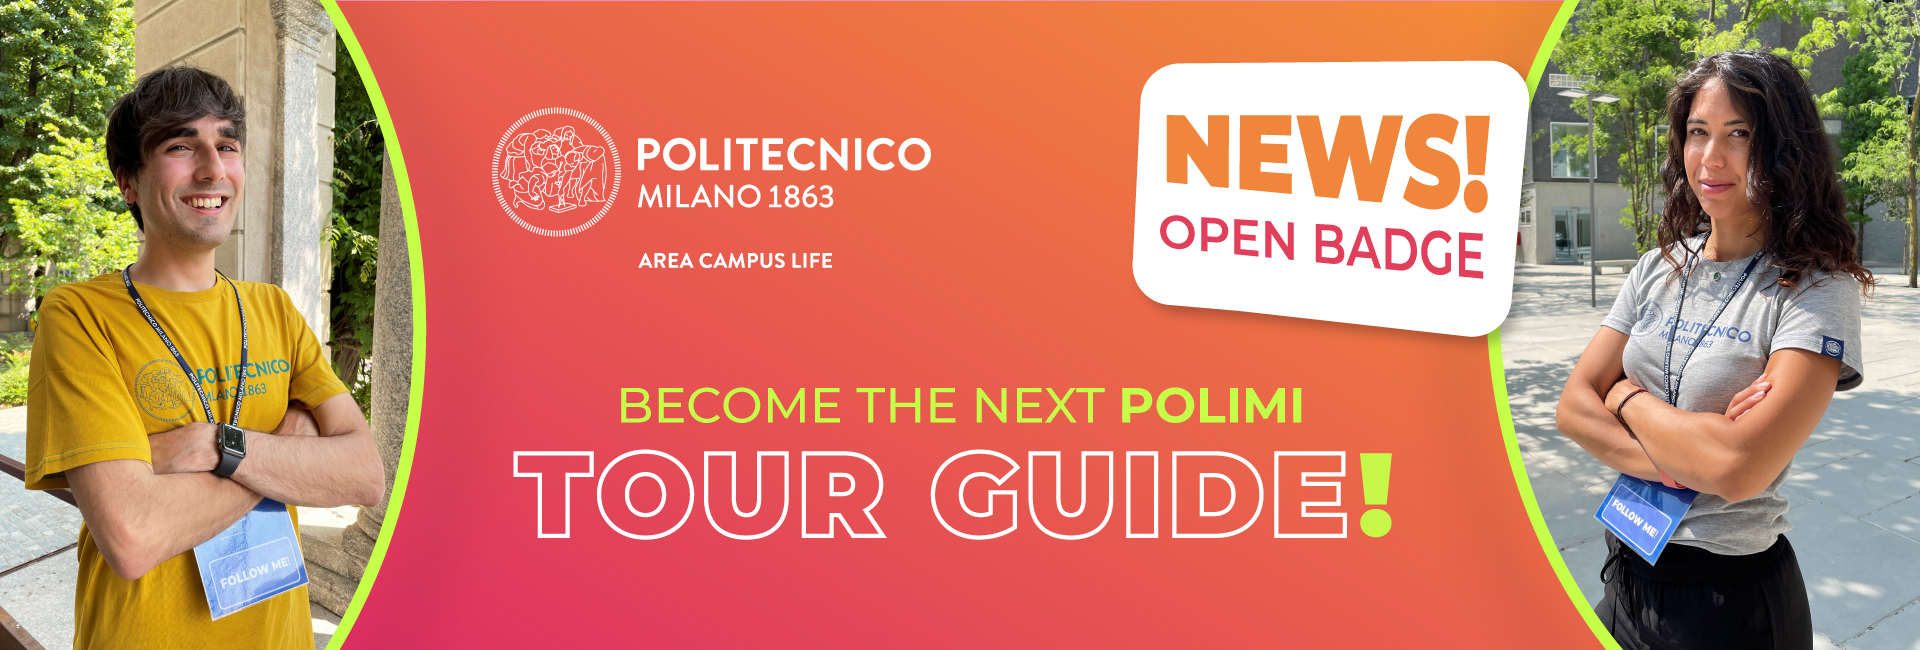 Become the next Polimi Tour Guide - News! Open Badge